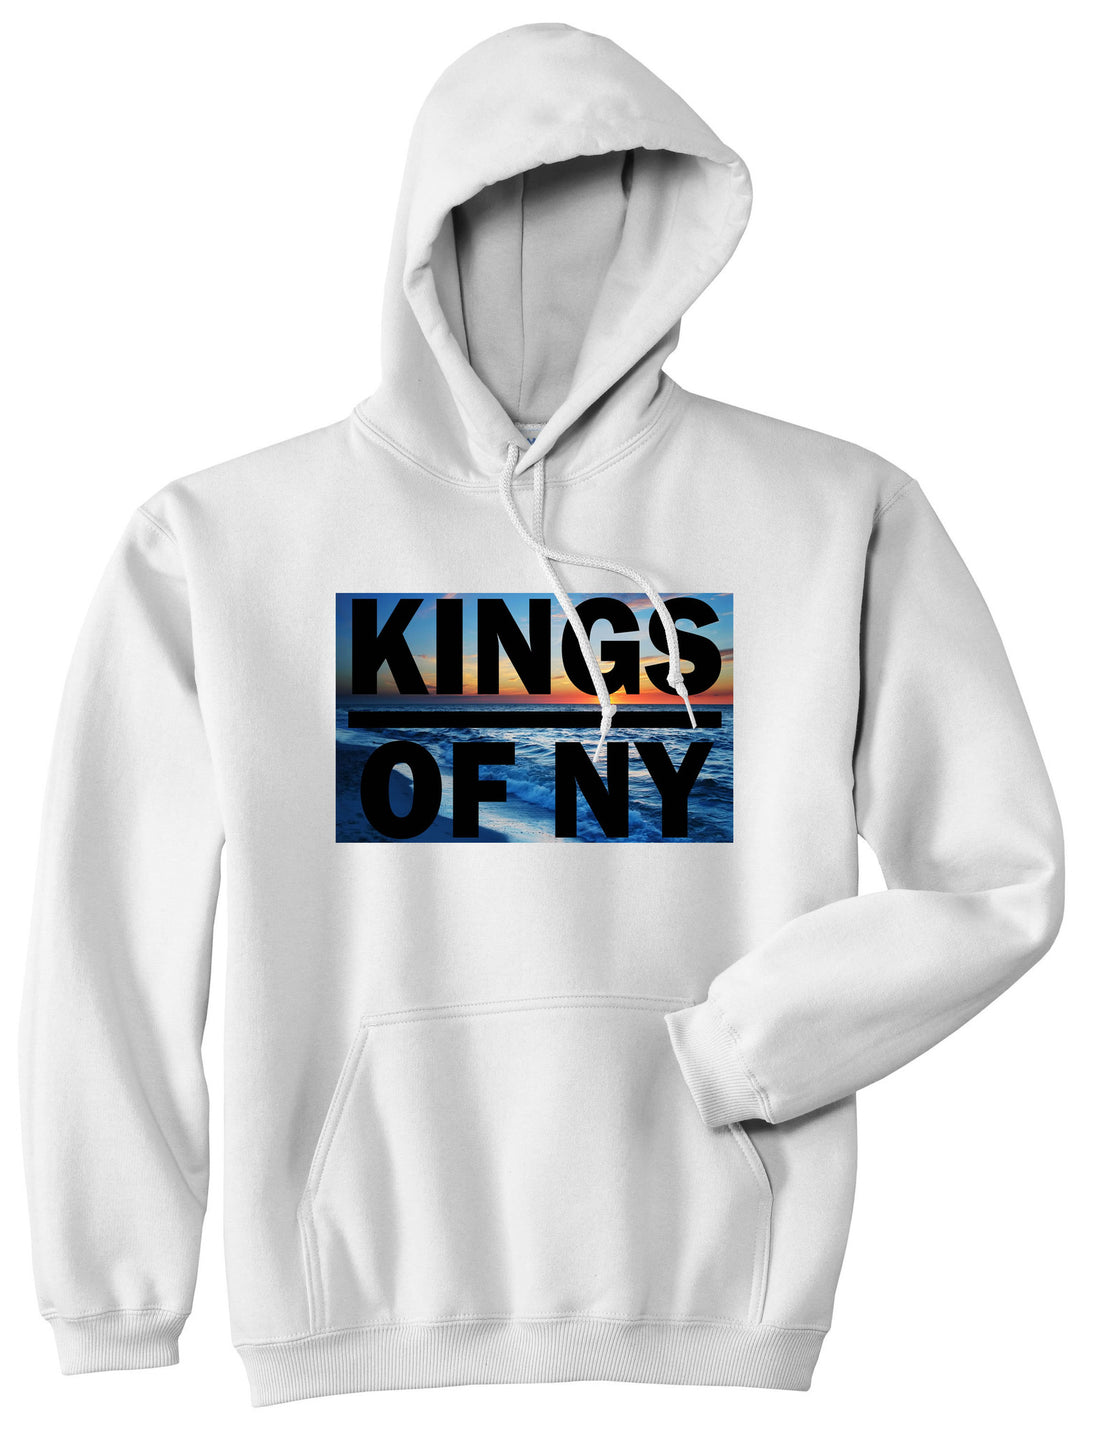 Sunset Logo Boys Kids Pullover Hoodie Hoody in White by Kings Of NY